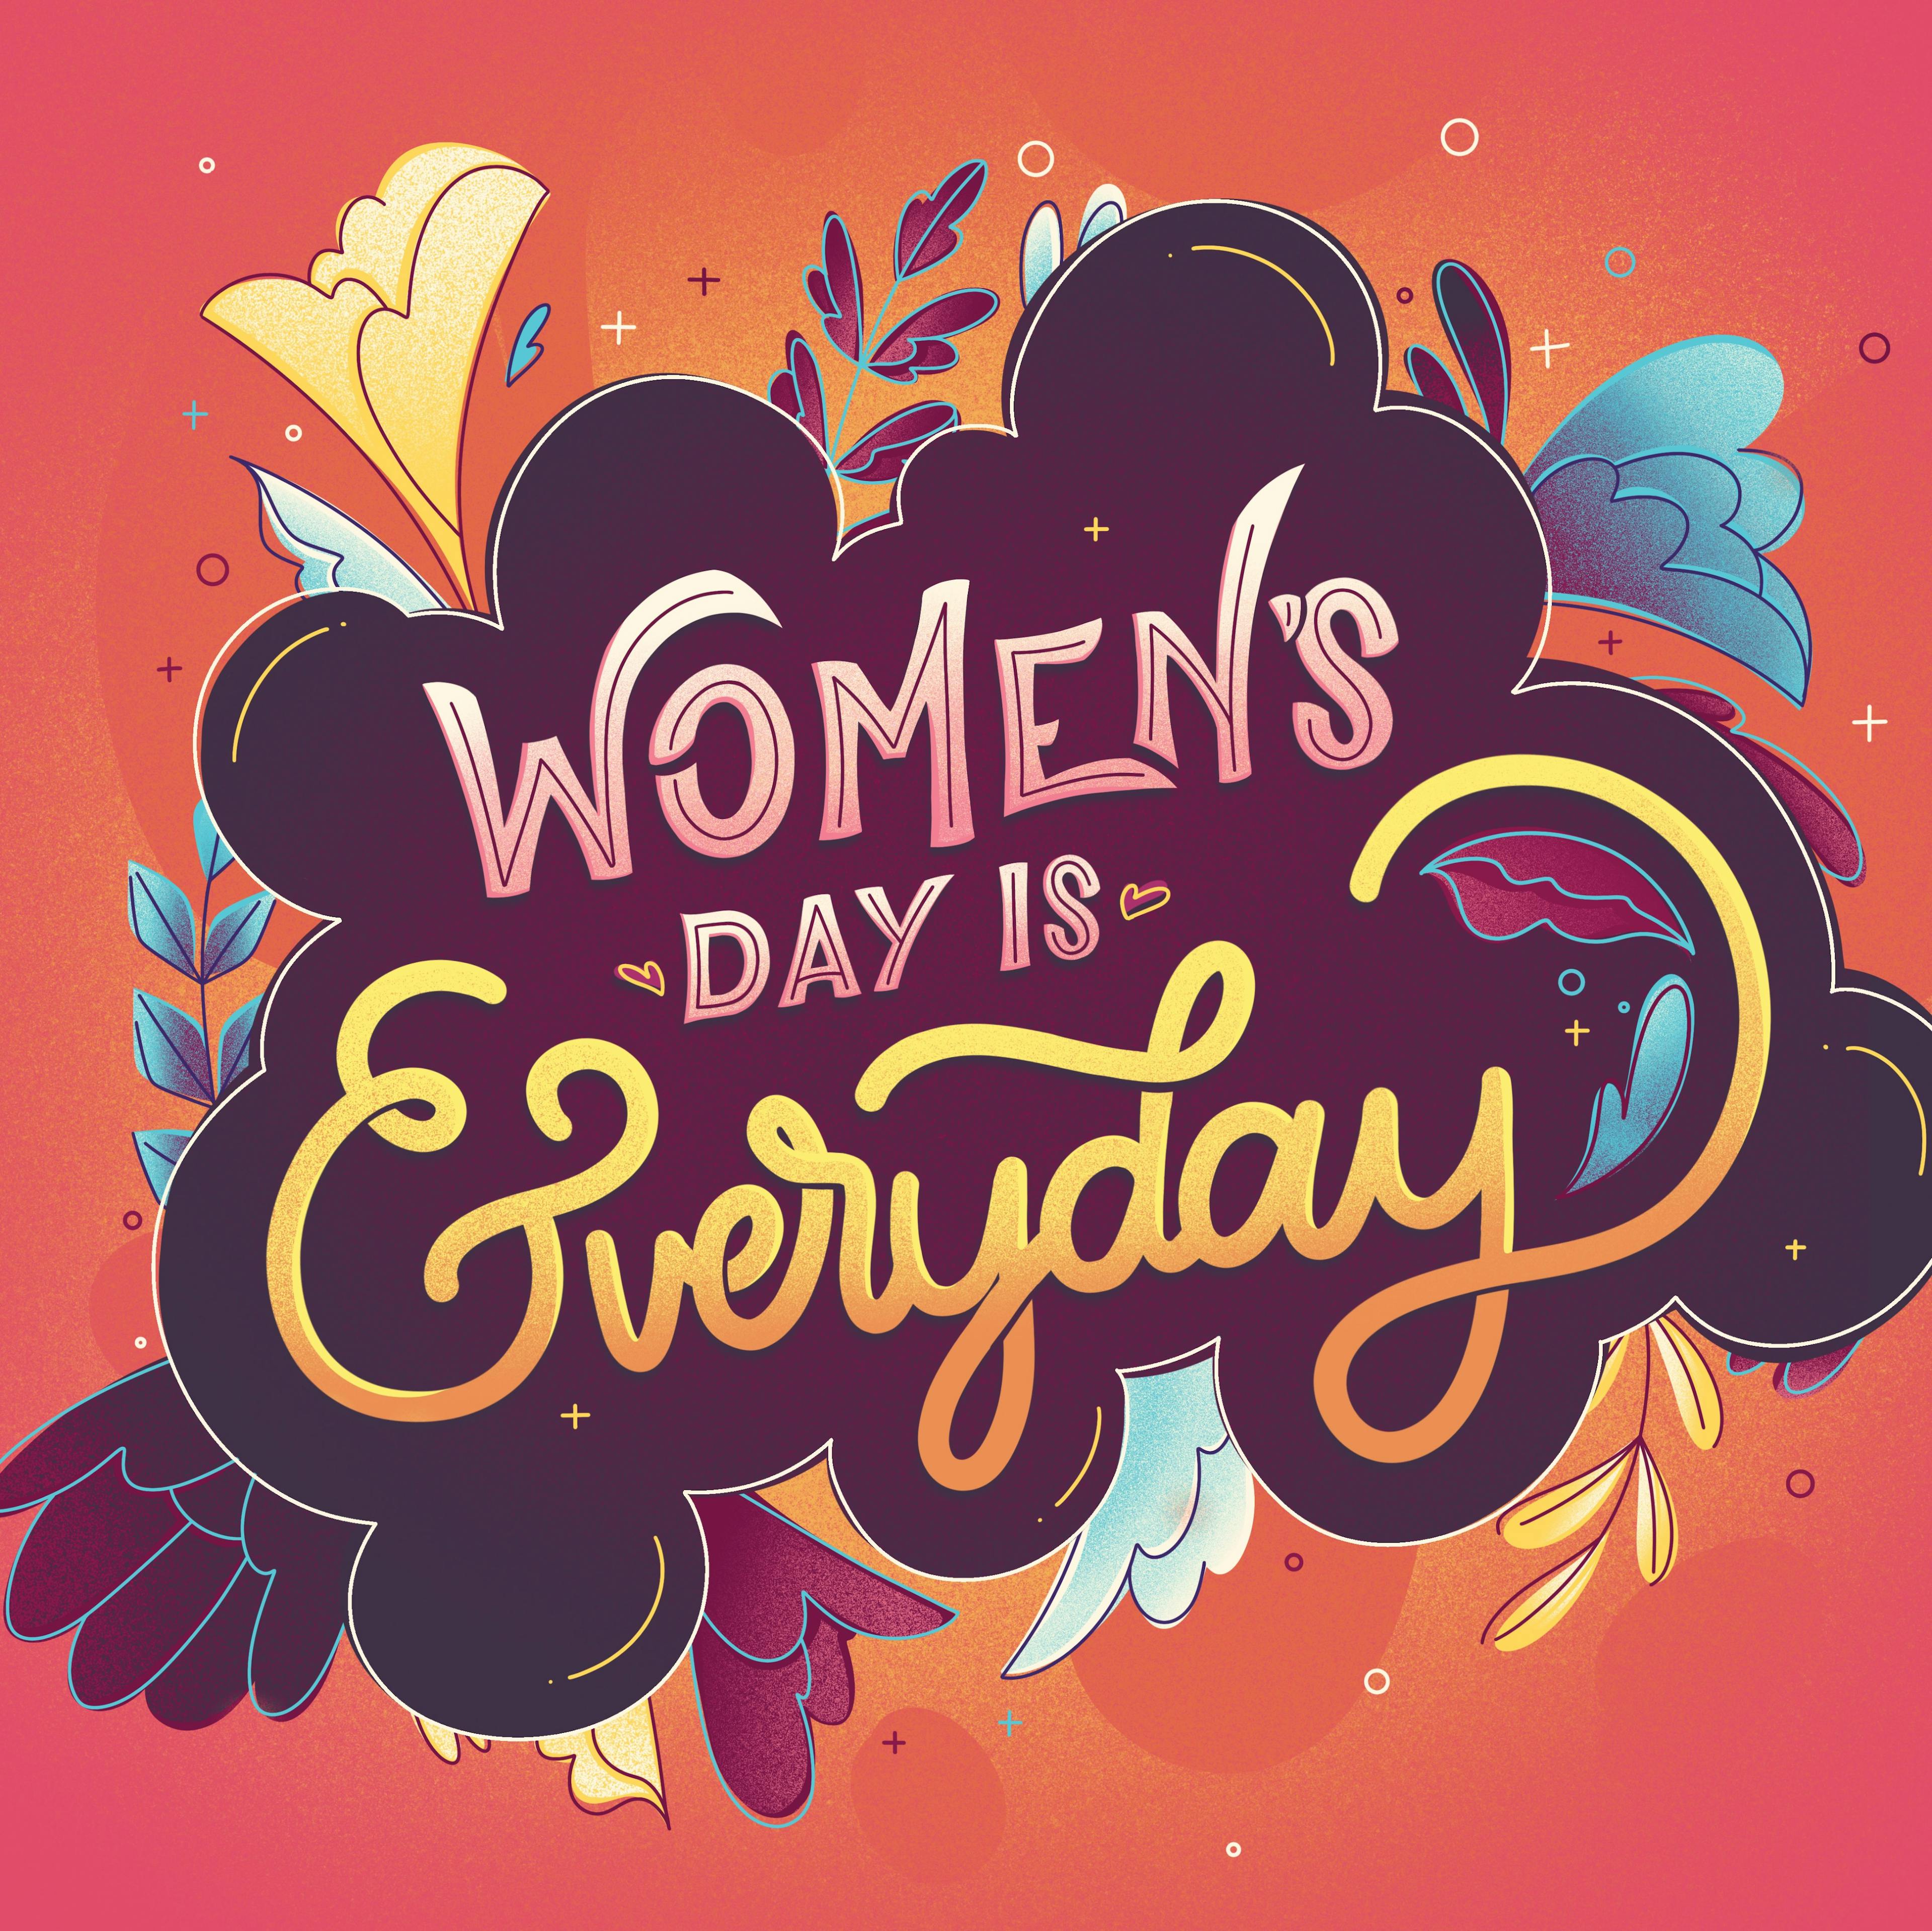 Women's Day is everyday